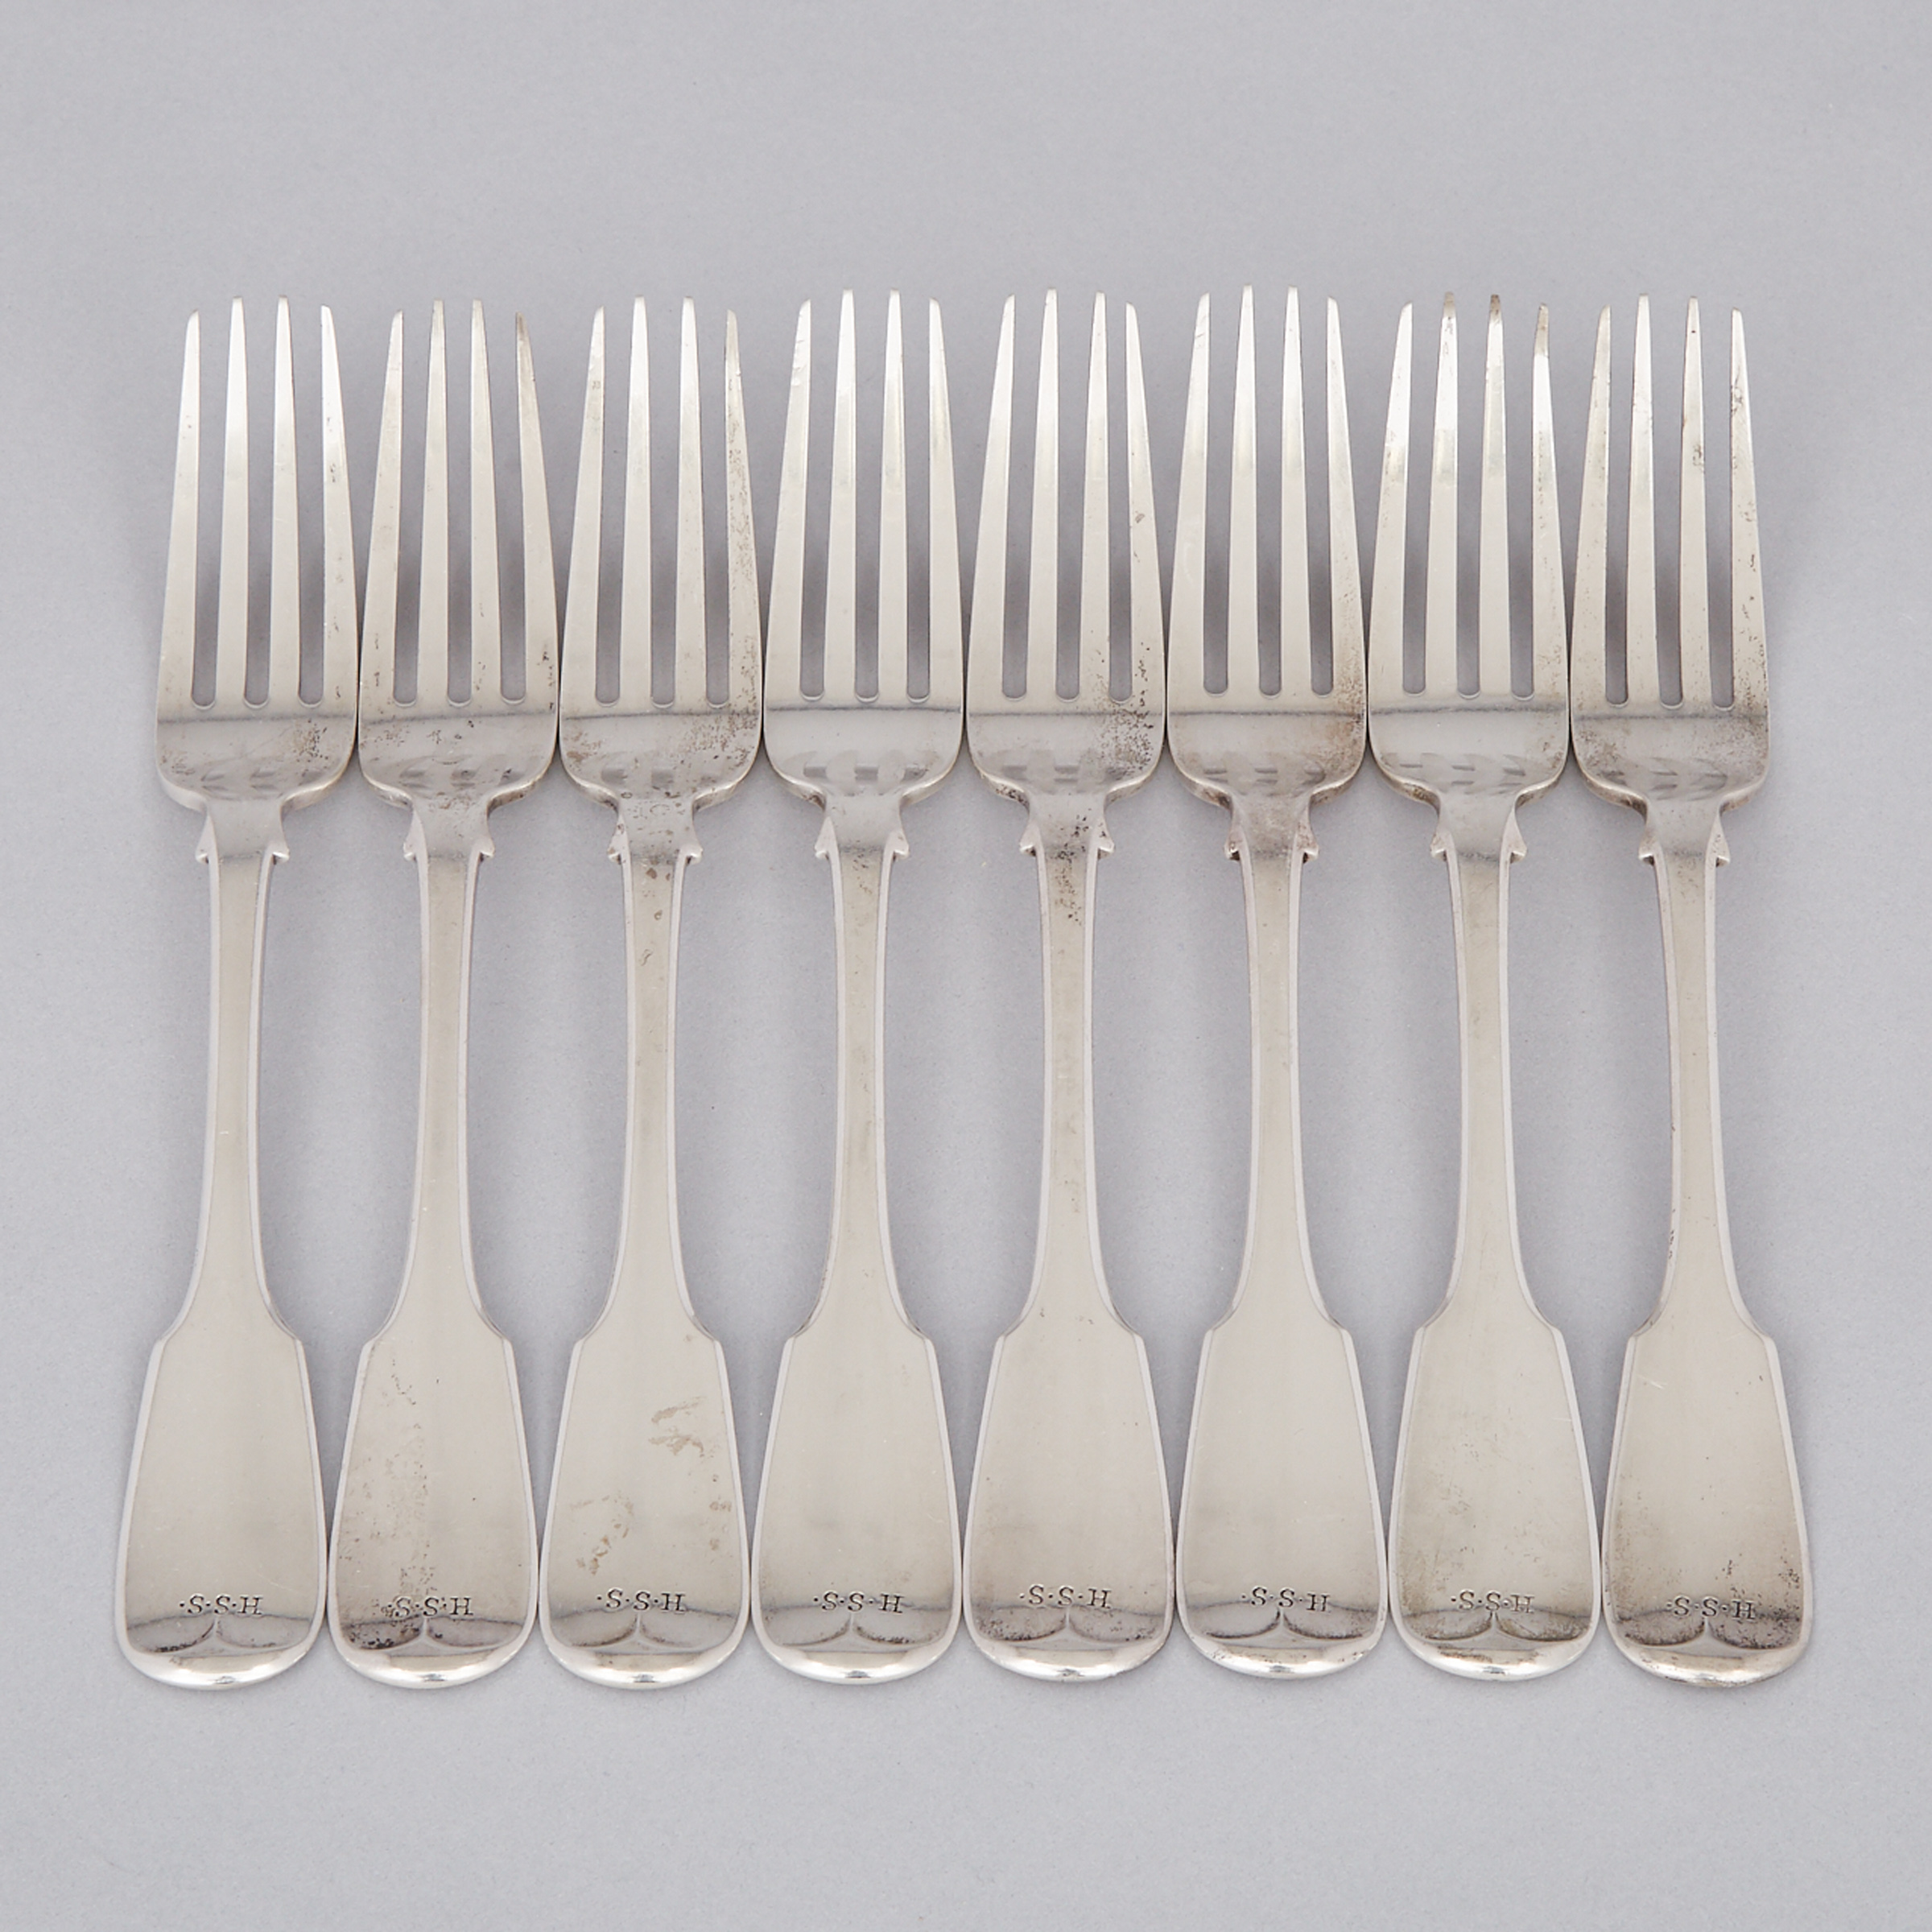 Eight Canadian Silver Fiddle Pattern Table Forks, Laurent Amiot, Quebec City, Que., c.1820